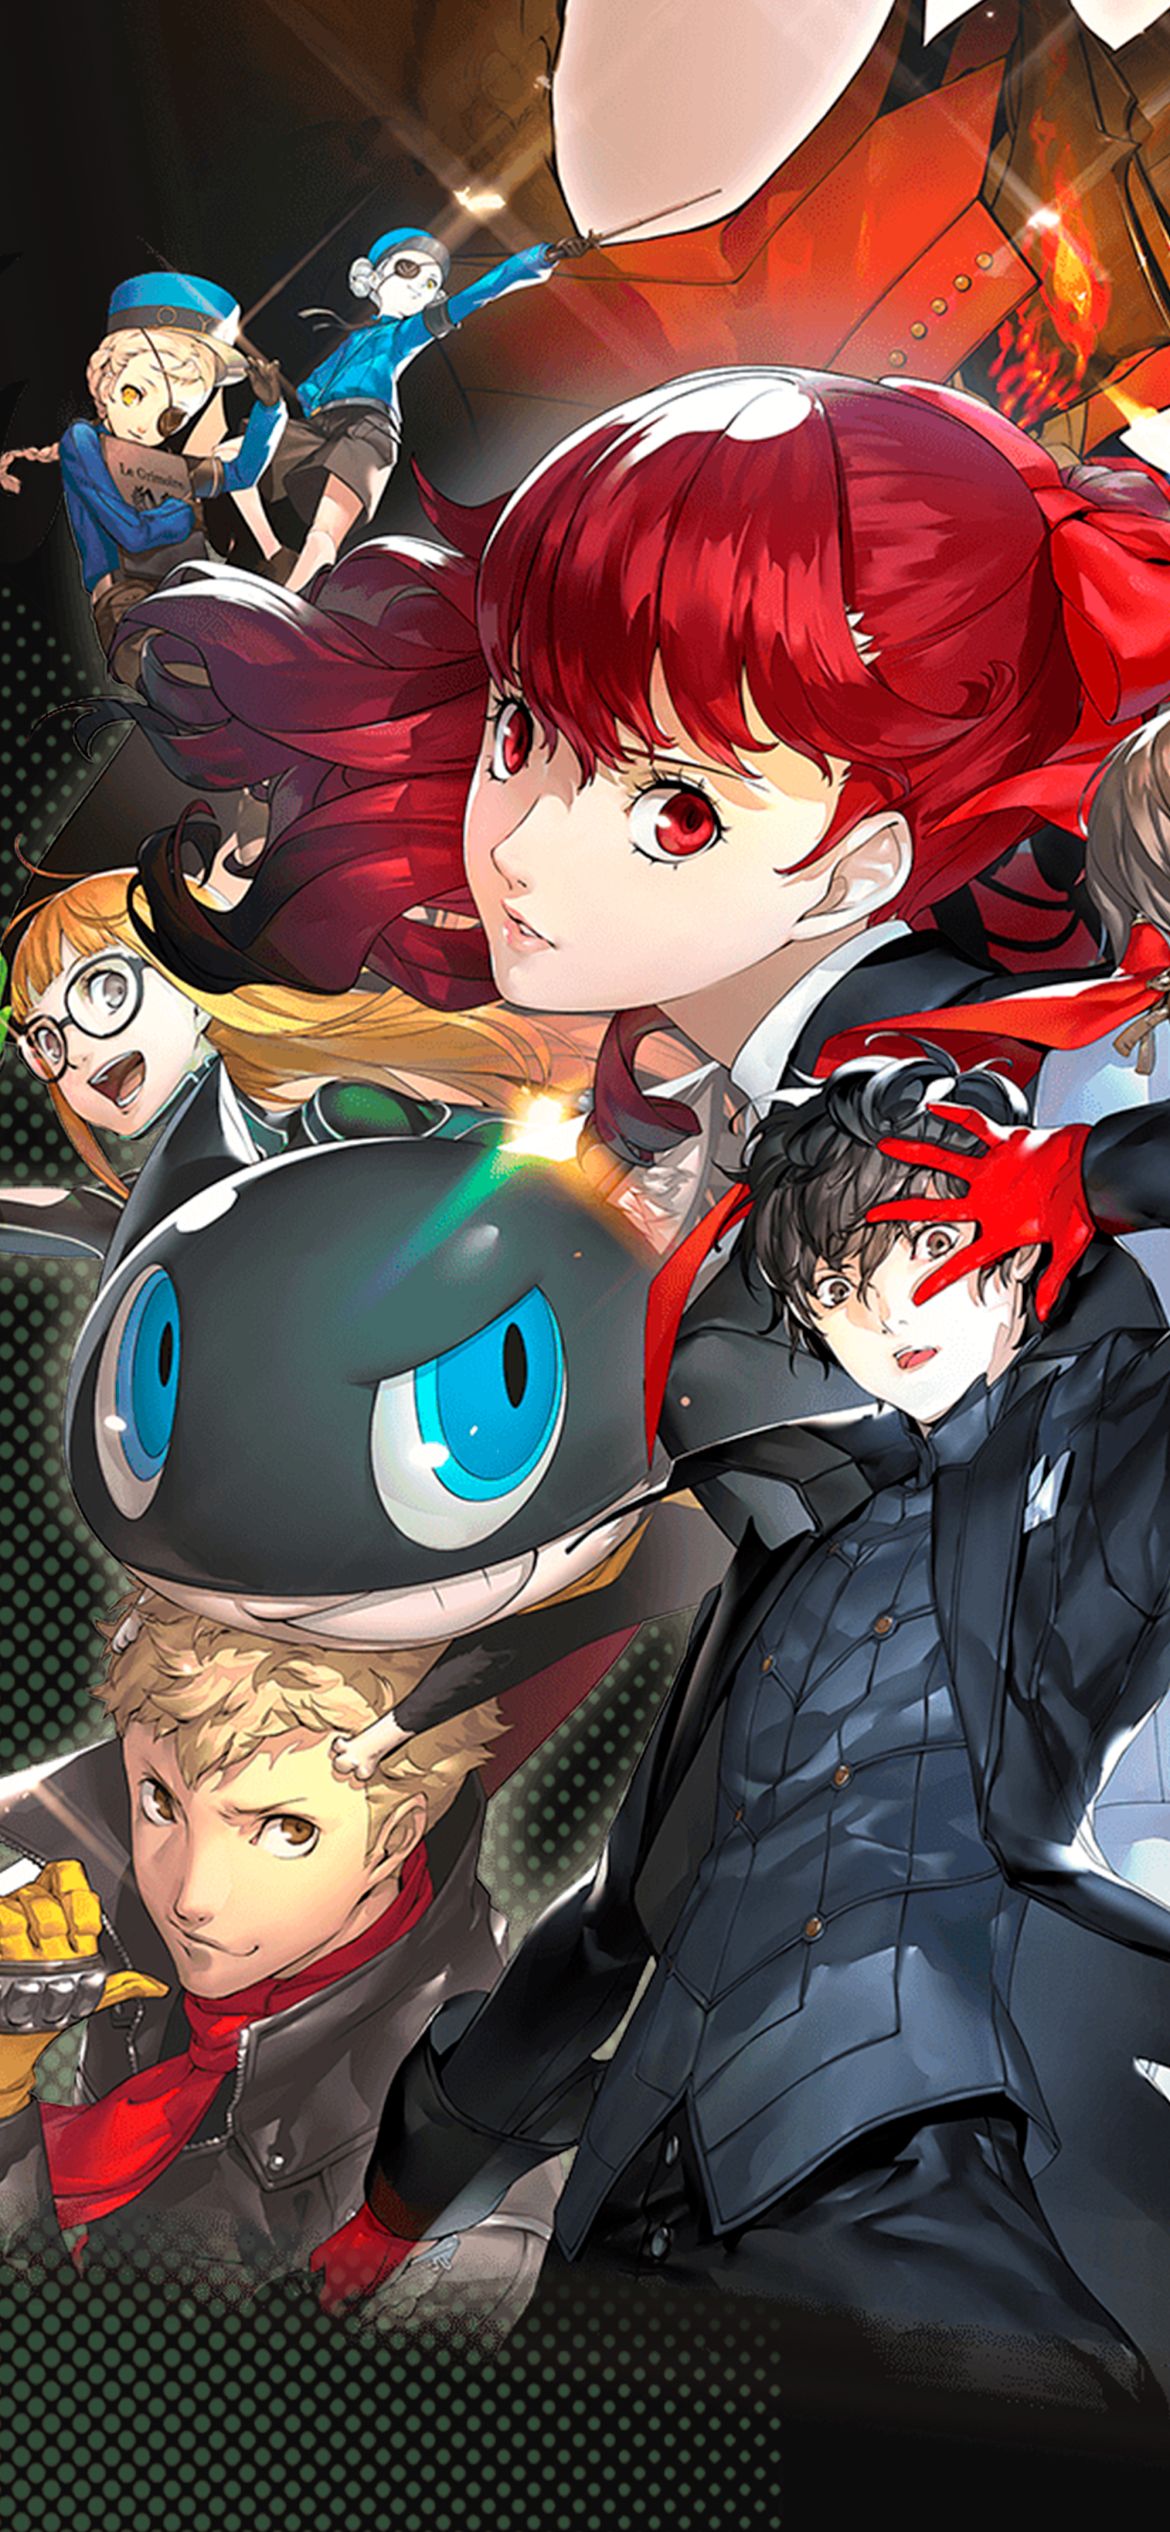 Mobile wallpaper Video Game Persona Persona 5 Royal 1185135 download  the picture for free